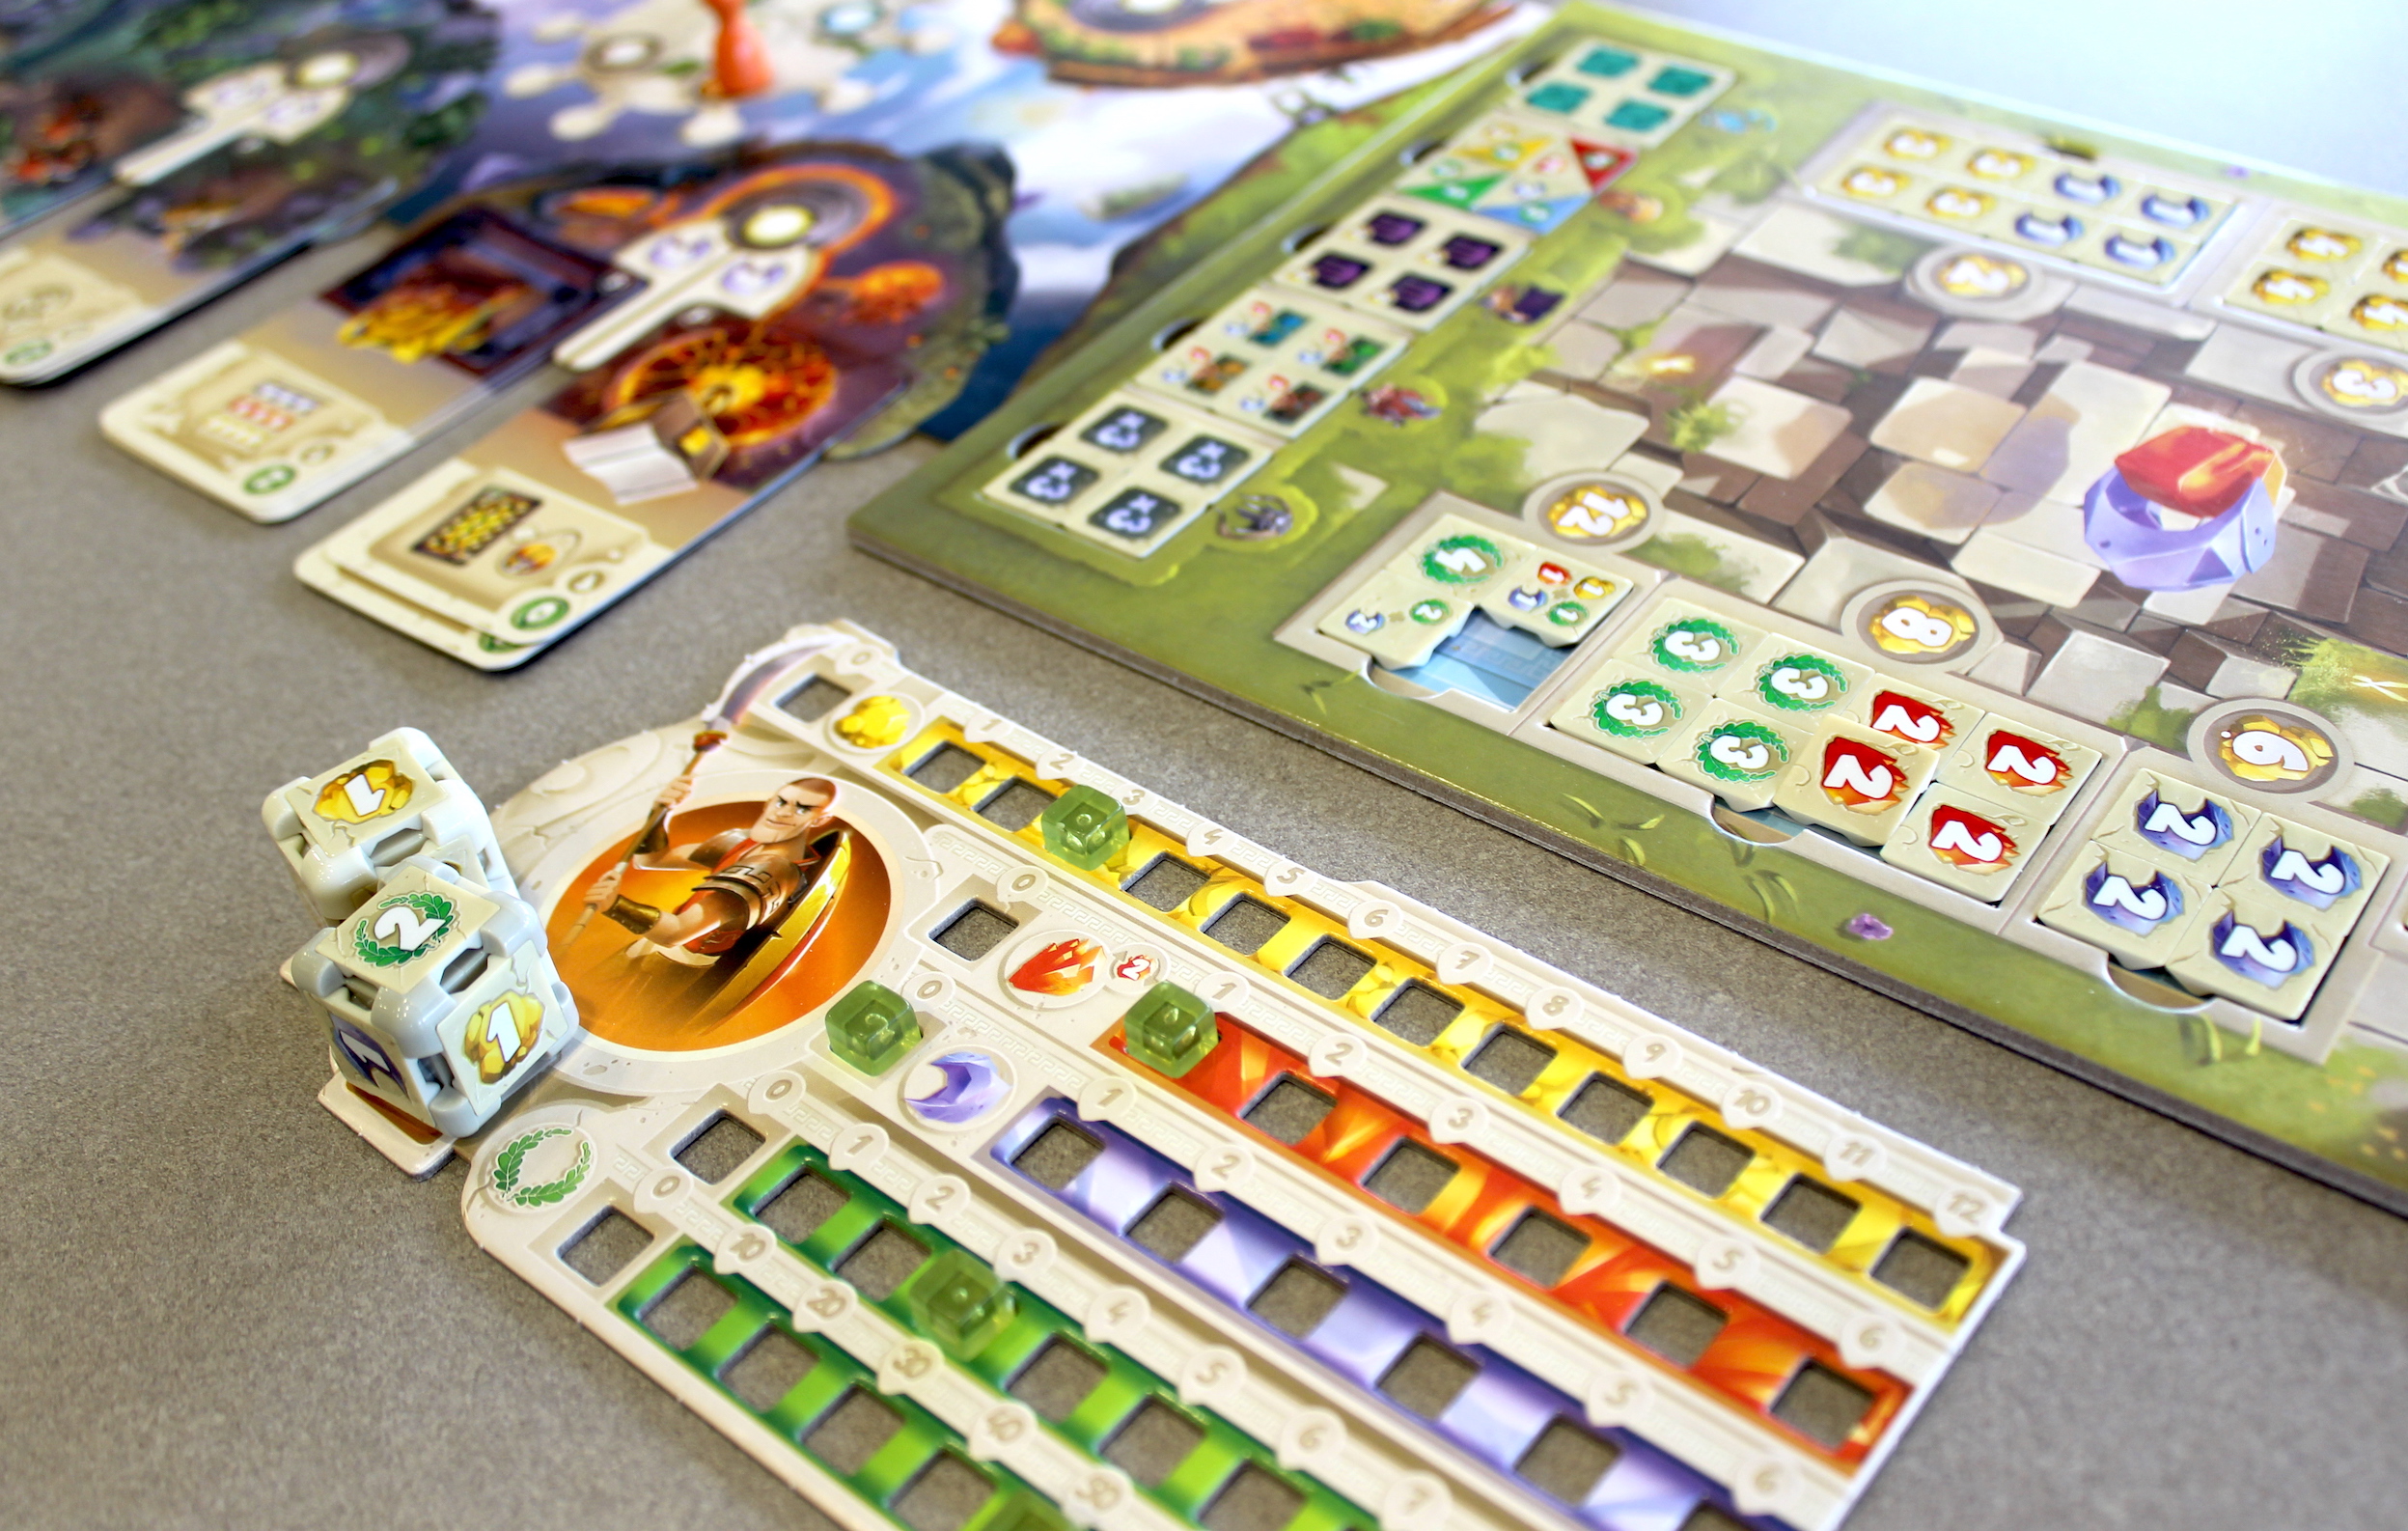 Best board games to play in quarantine, according to experts